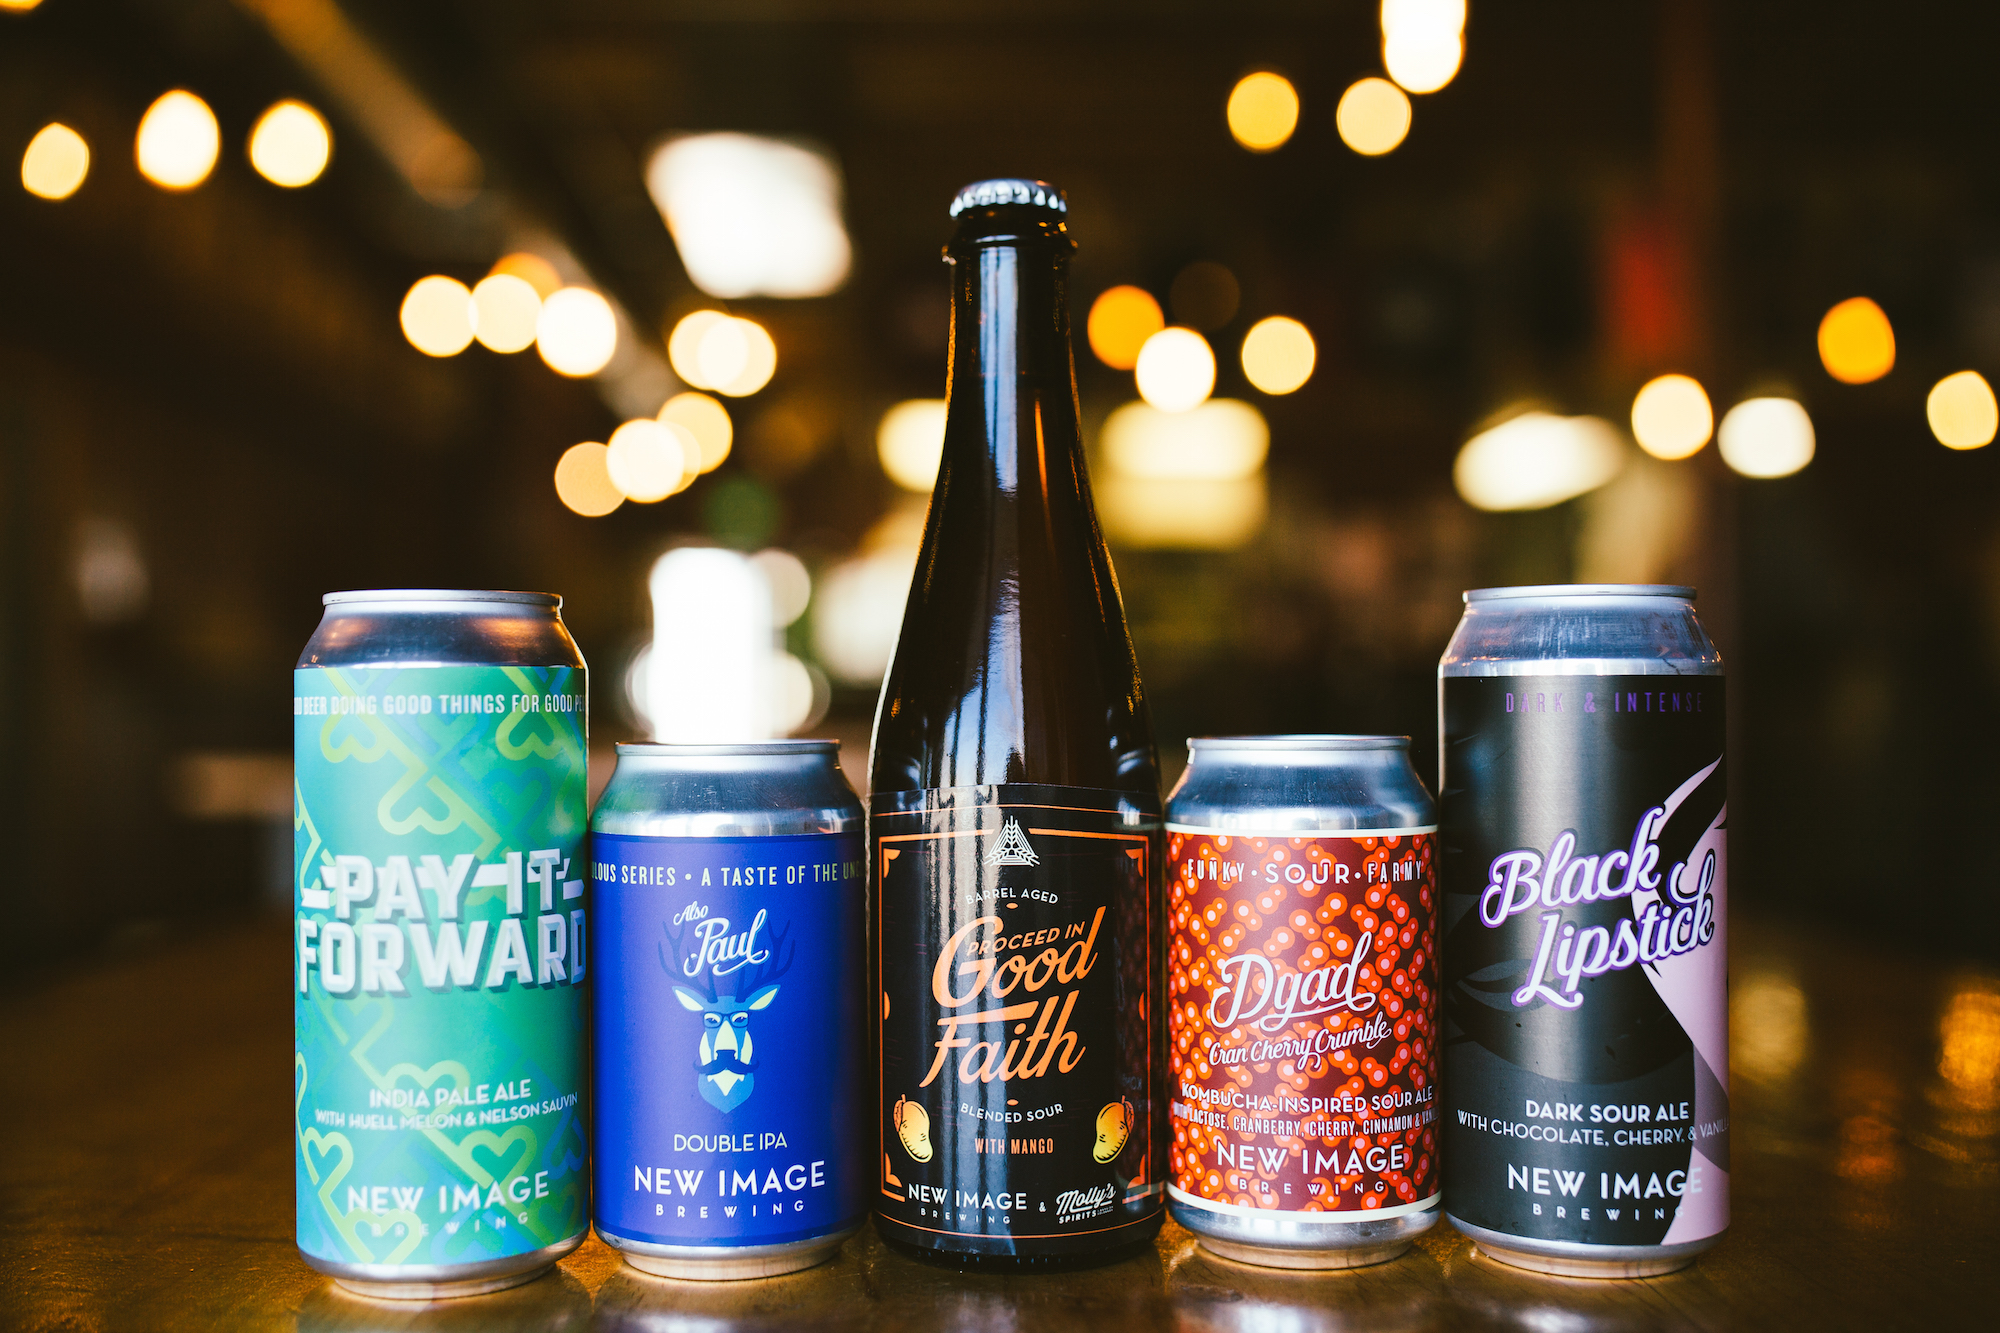 New Image Brewing is Expanding Arvada’s Craft Beer Scene - 303 Magazine